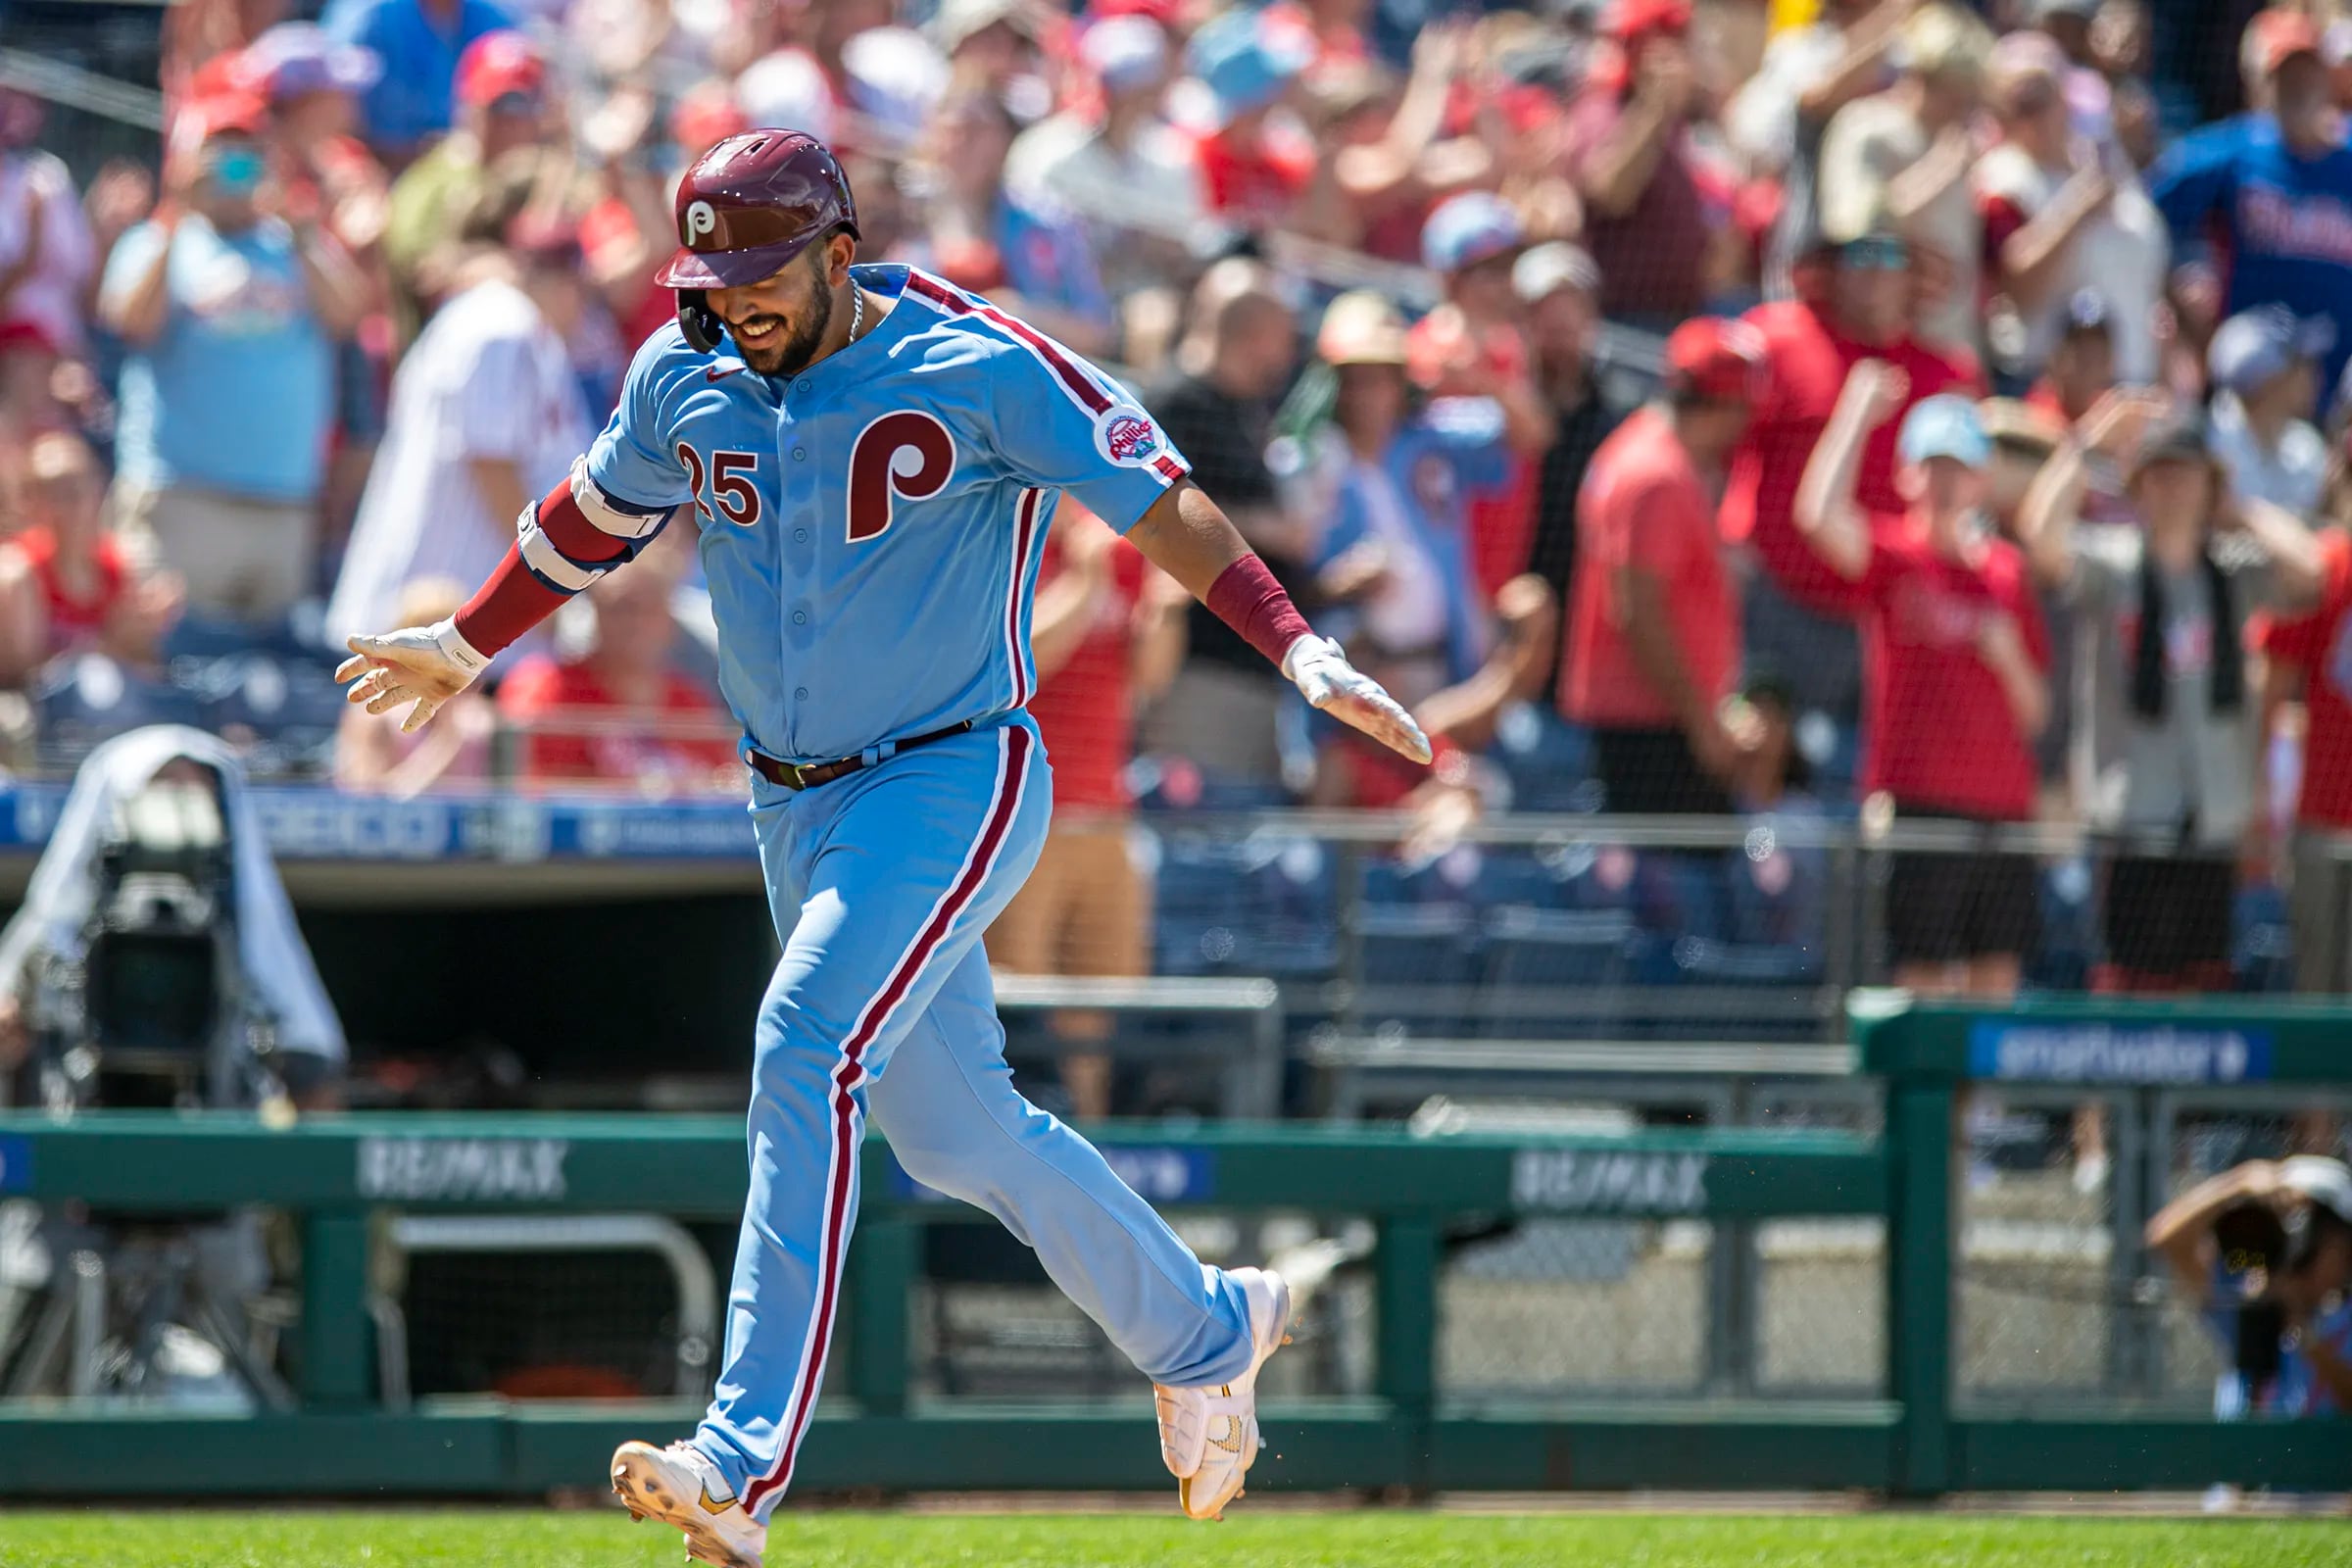 Surging Phillies win 5th in a row, rally past Nationals 12-6 – Daily Local